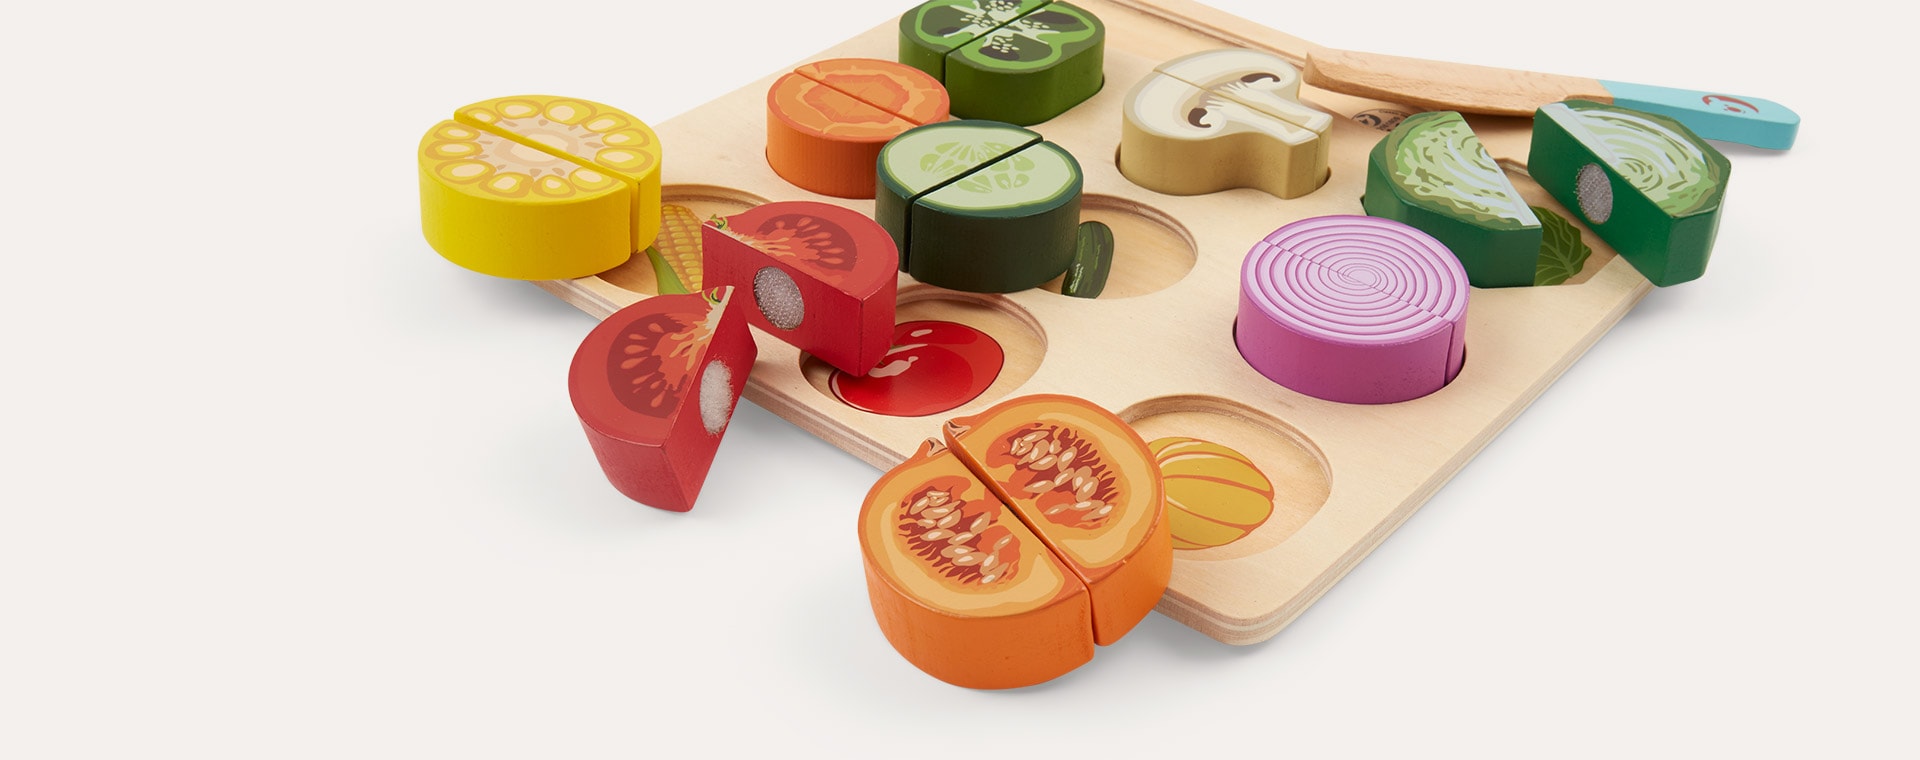 Vegetable Classic World Cutting Vegetable Puzzle